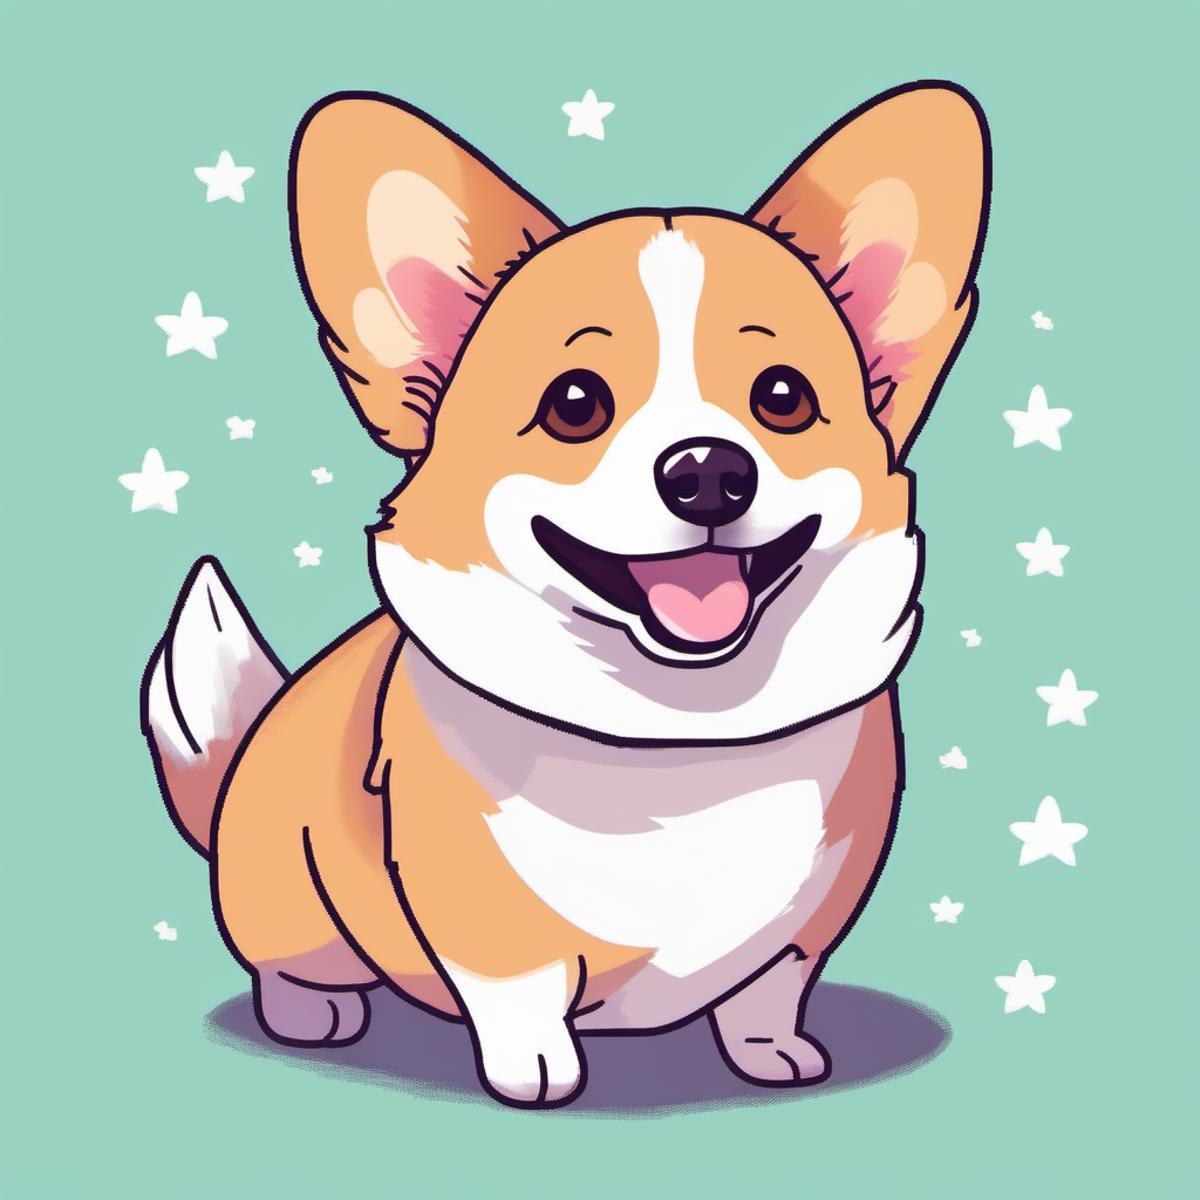 A cute cartoon drawing of a smiling corgi dog with stars in the background.